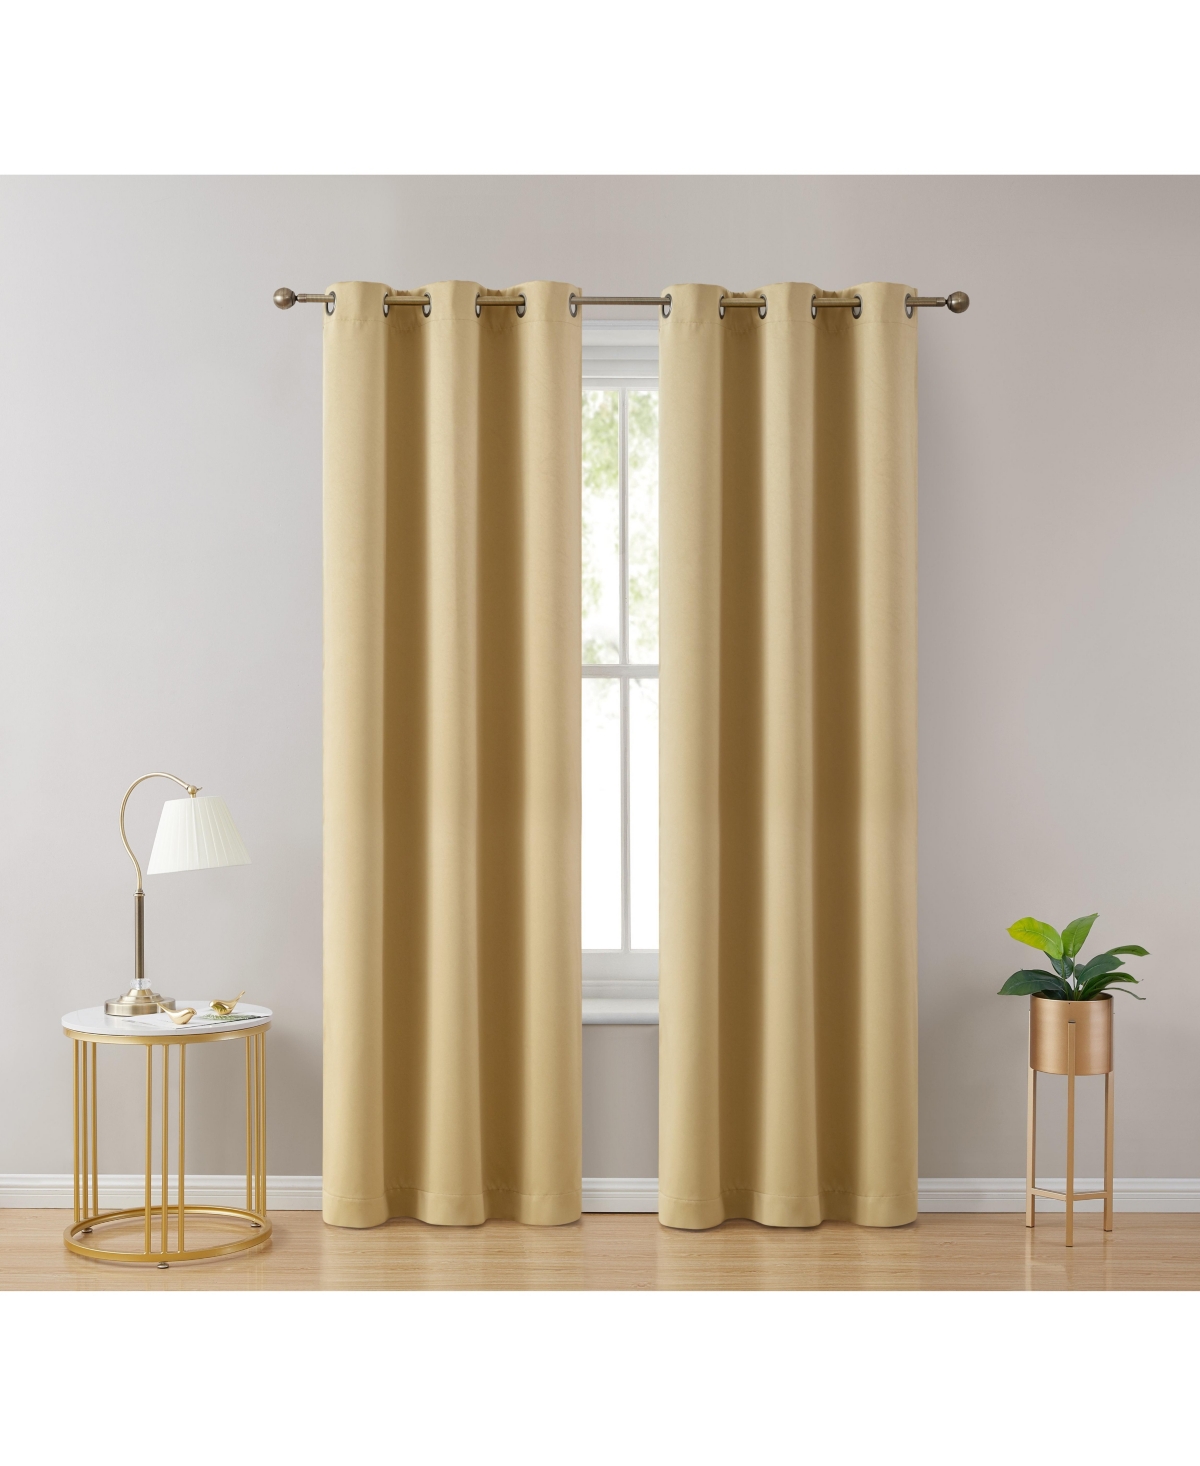 Laurance Full Shaded Blackout Curtains - Thermal Insulation Light Blocking Home Theater Grommet Window Drapery Basement Curtains, Set of 2 - Pe